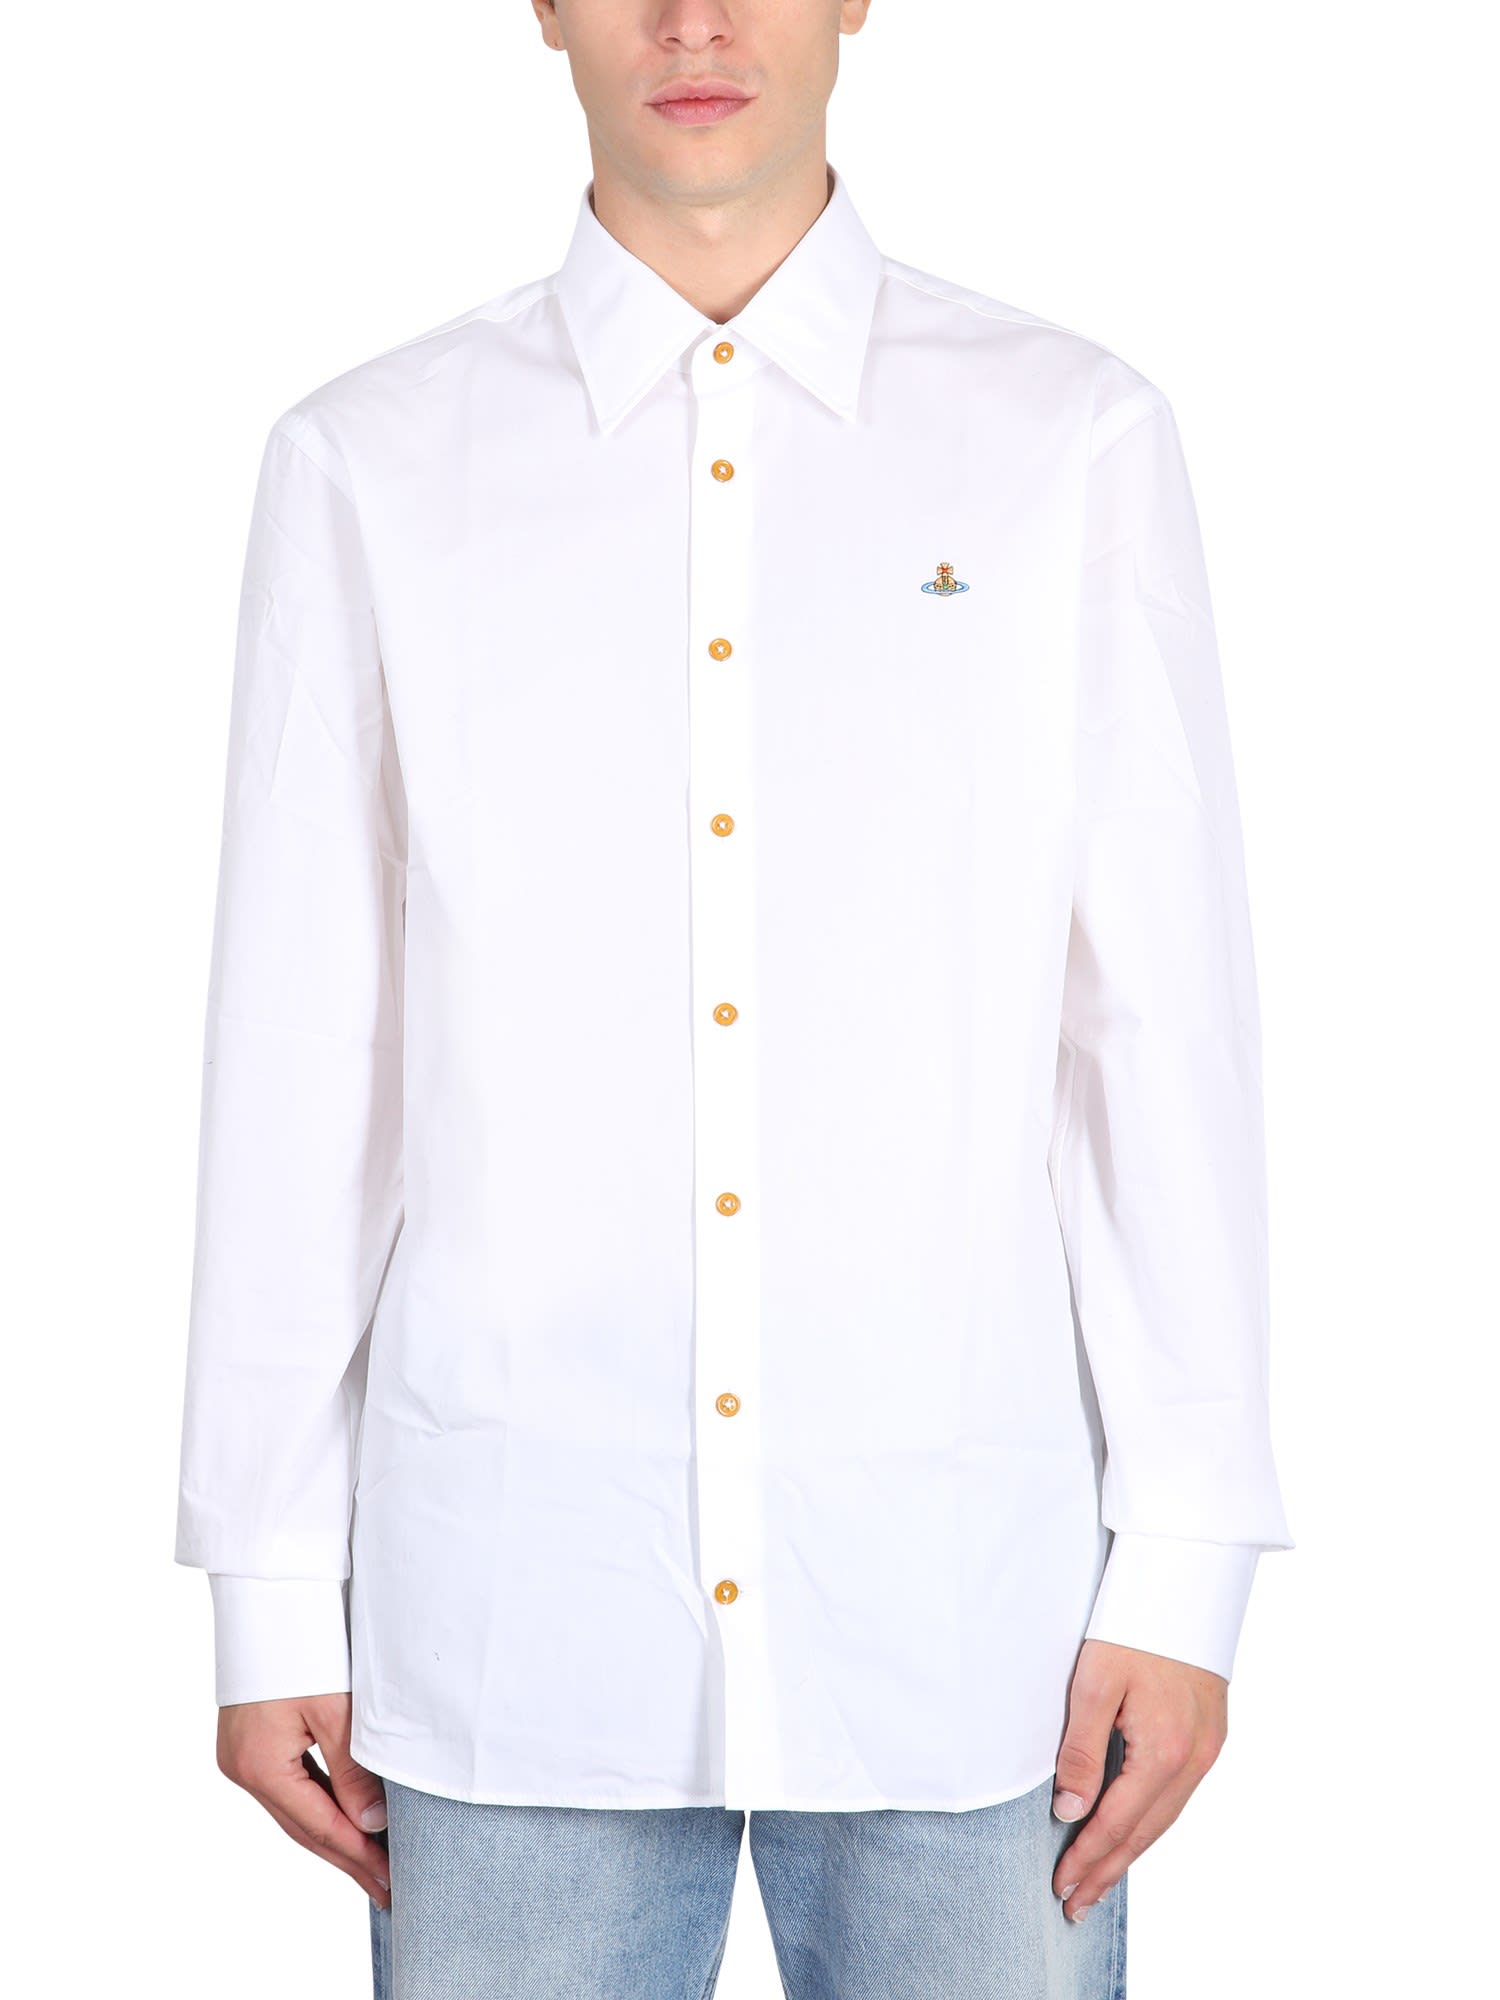 Vivienne Westwood Shirt With Orb Embroidery